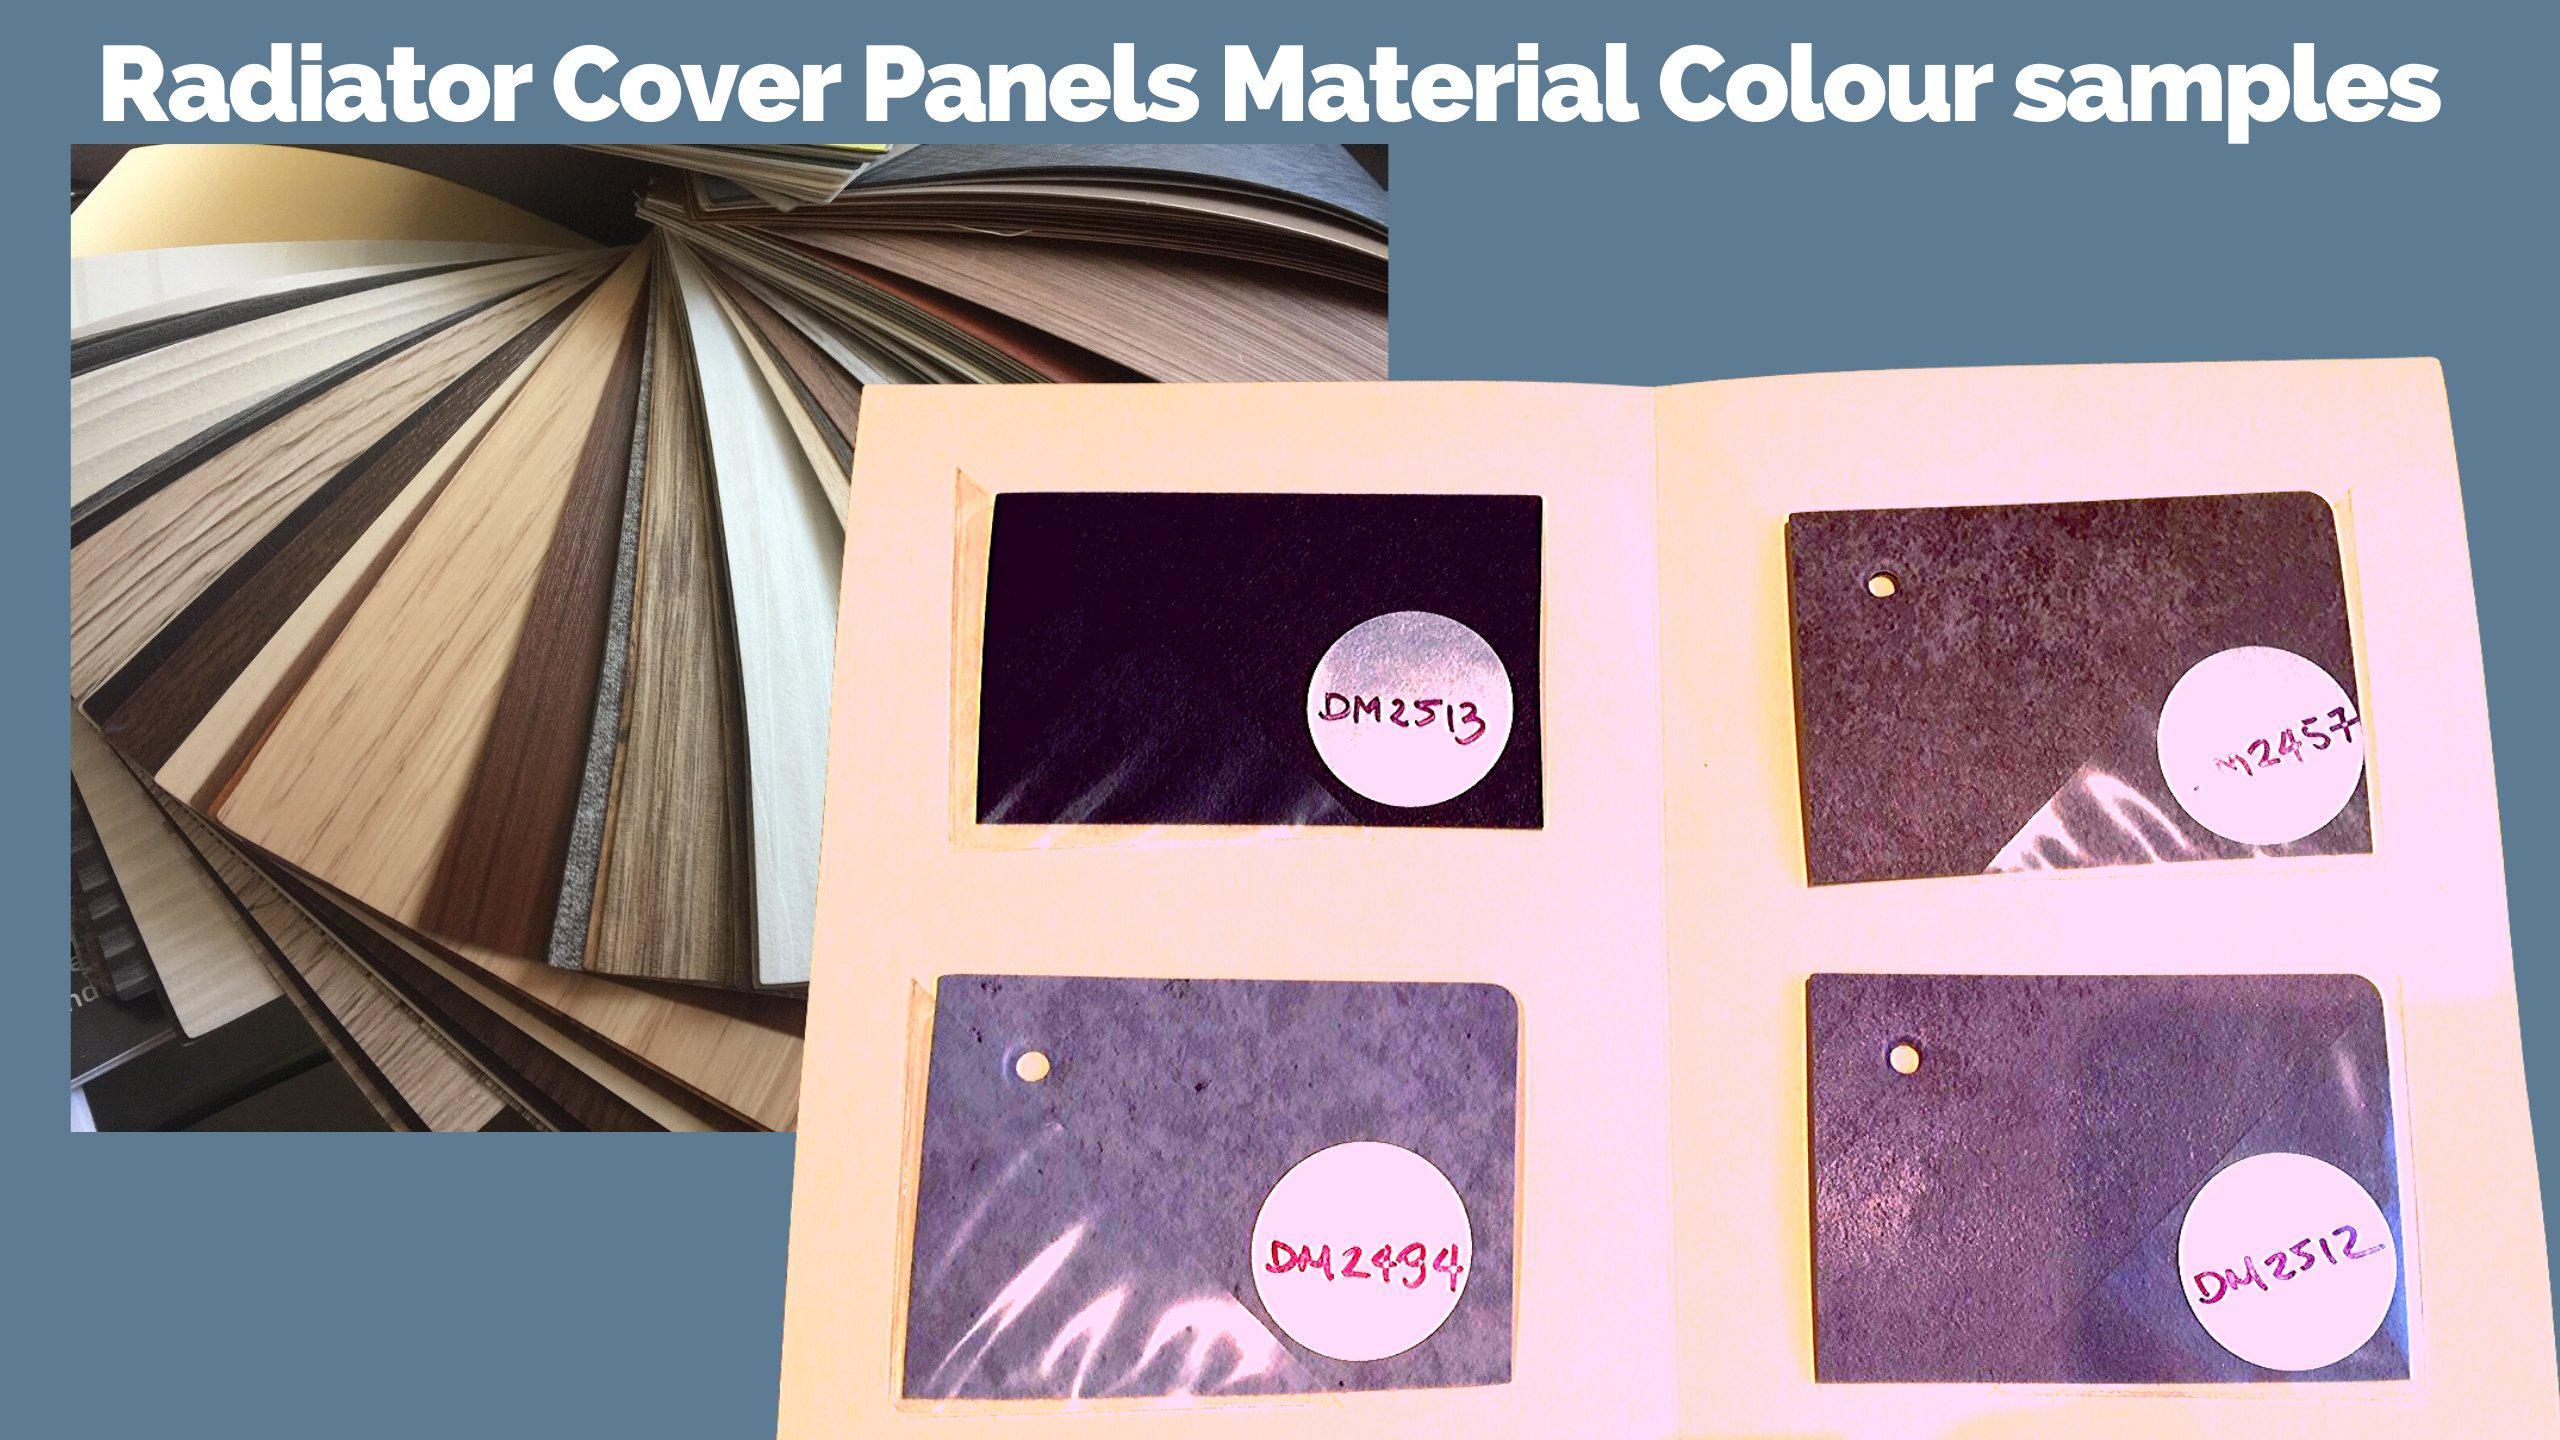 Radiator Cover Wall Panels Cupboard Doors material Finish and Colours samples-Distinct Designs (London) Ltd